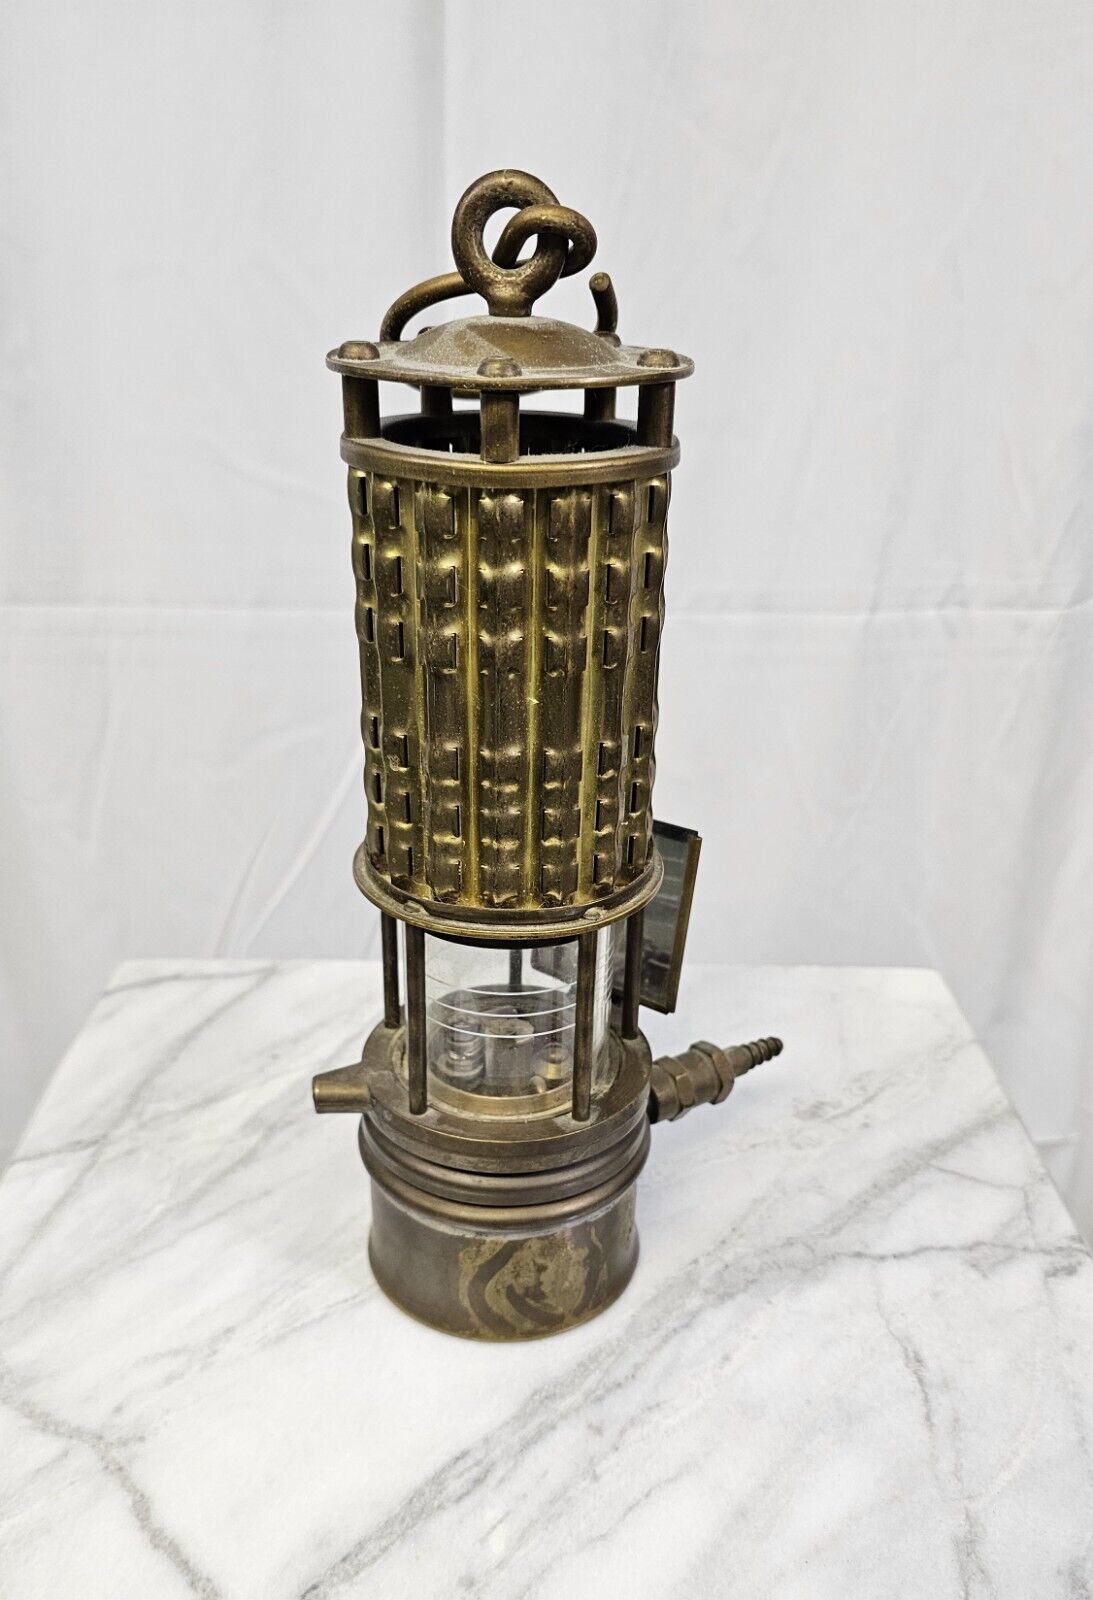 Antique Miner's Lamp - Brass, Wolf Safety Lamp Of America Inc. New York, USA